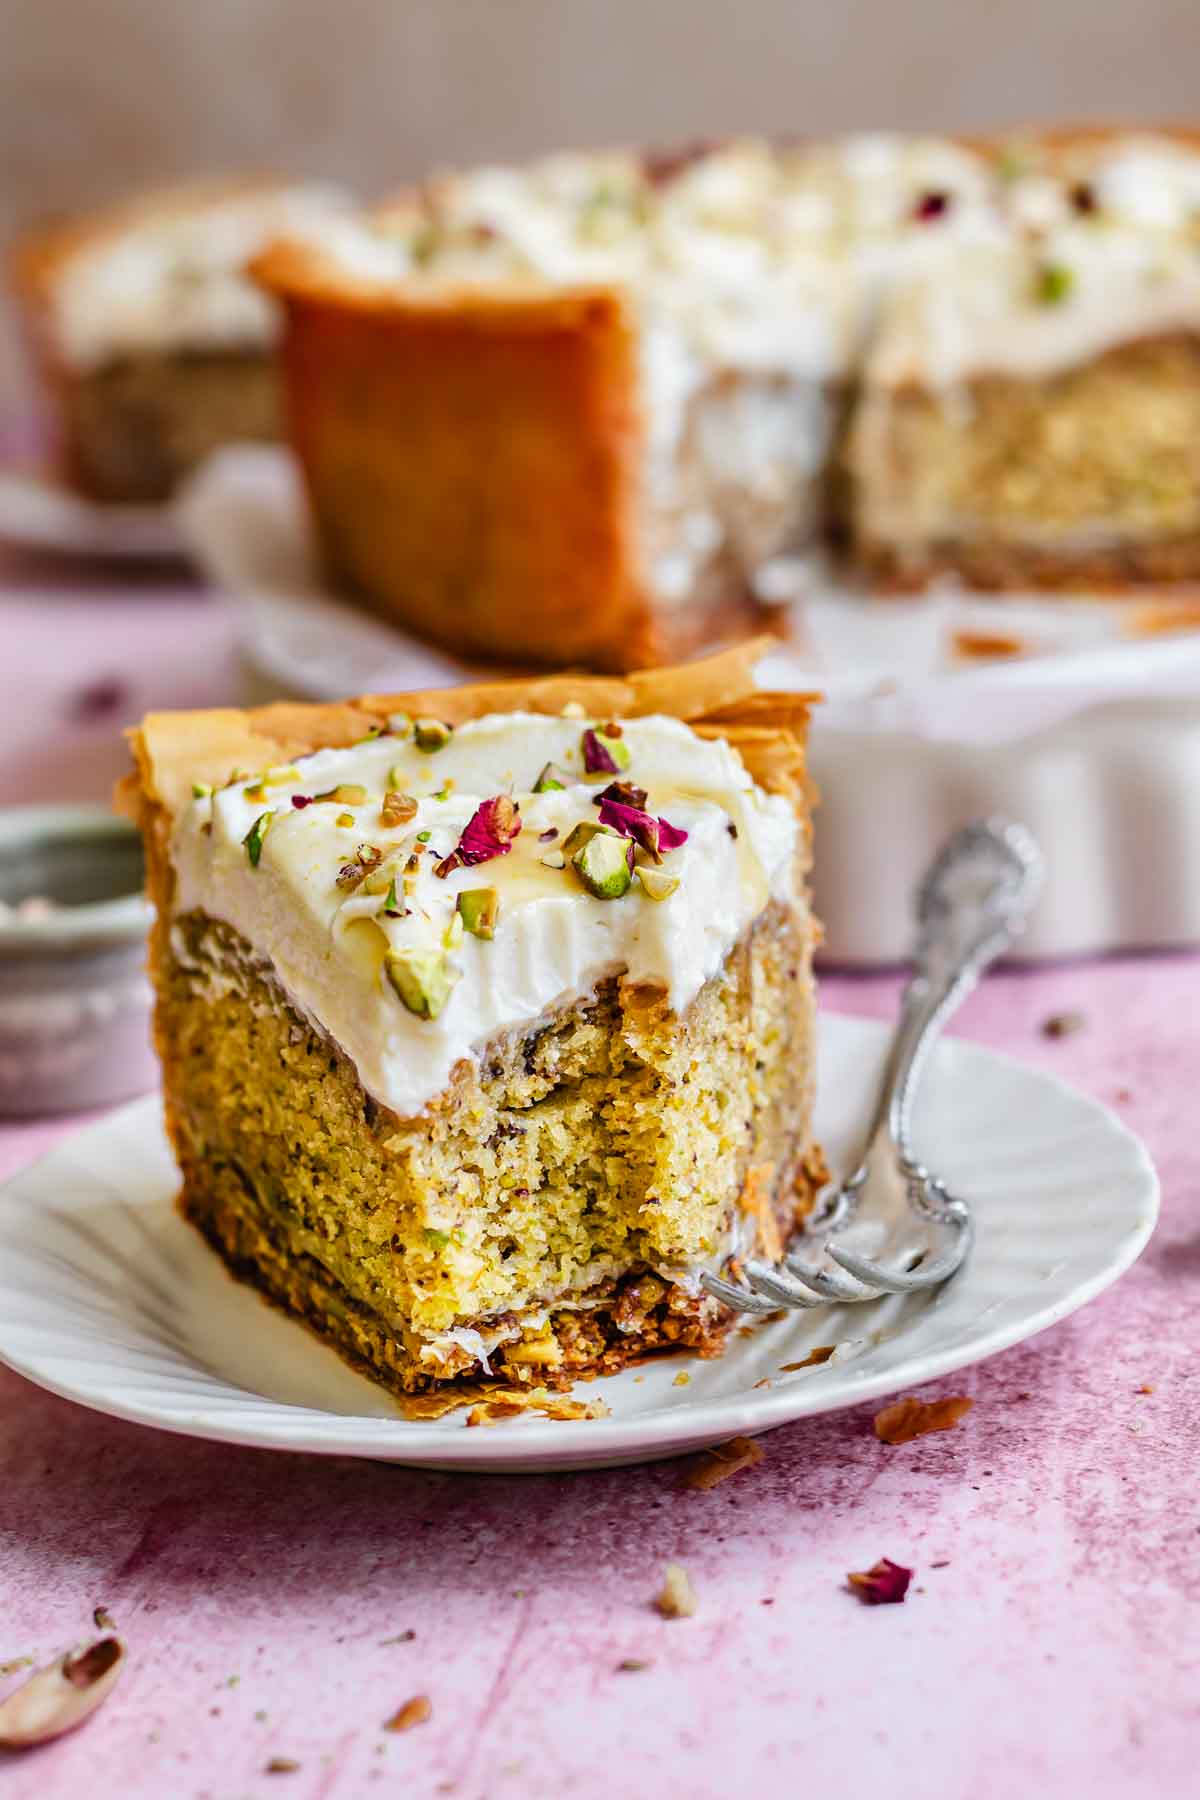 Pistachio cake with a bite removed on a plate.